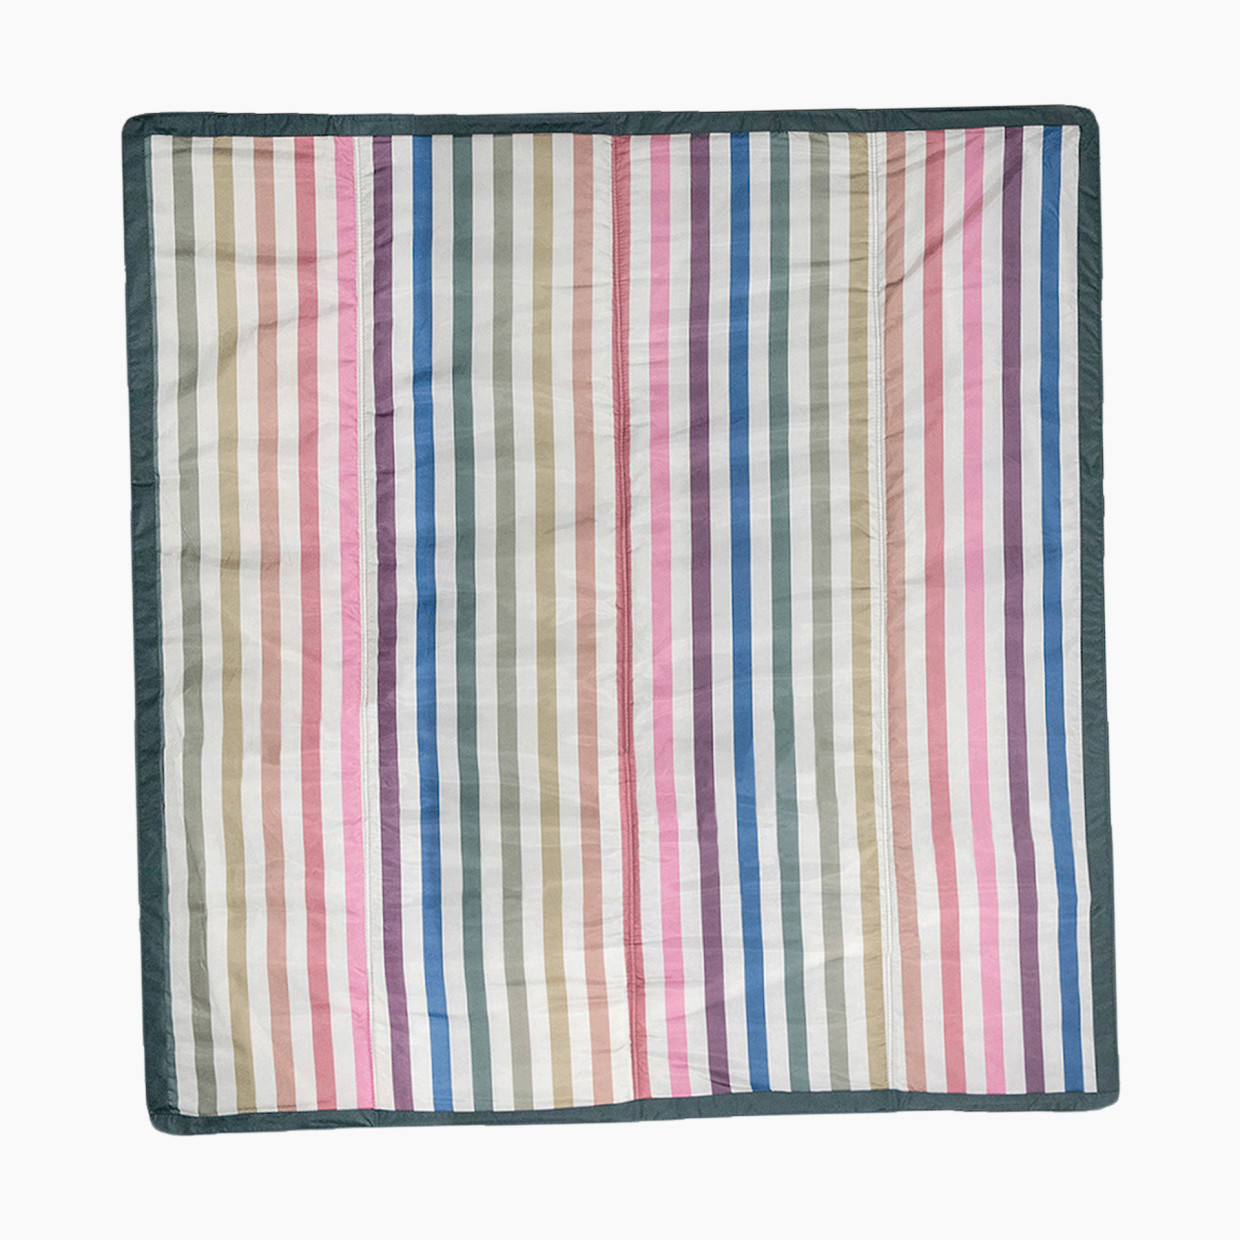 Little Unicorn Outdoor Blanket - Chroma Rugby Stripe, 5 X 5 Ft.